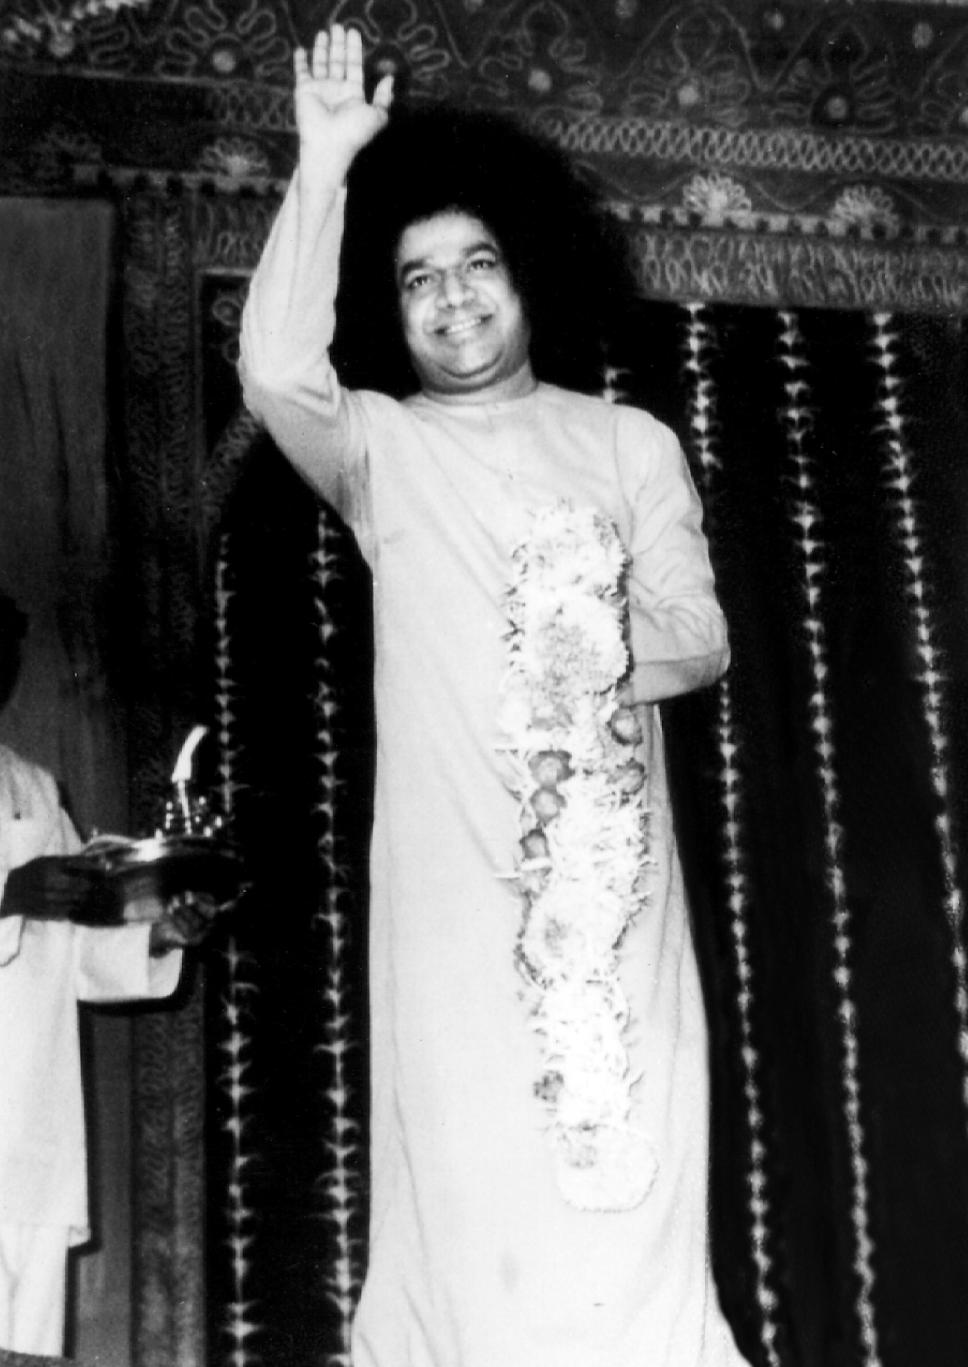 Strengthened by Swami s Grace, encouraged by Swami s Blessings, engage in sadhana (spiritual practice) and achieve